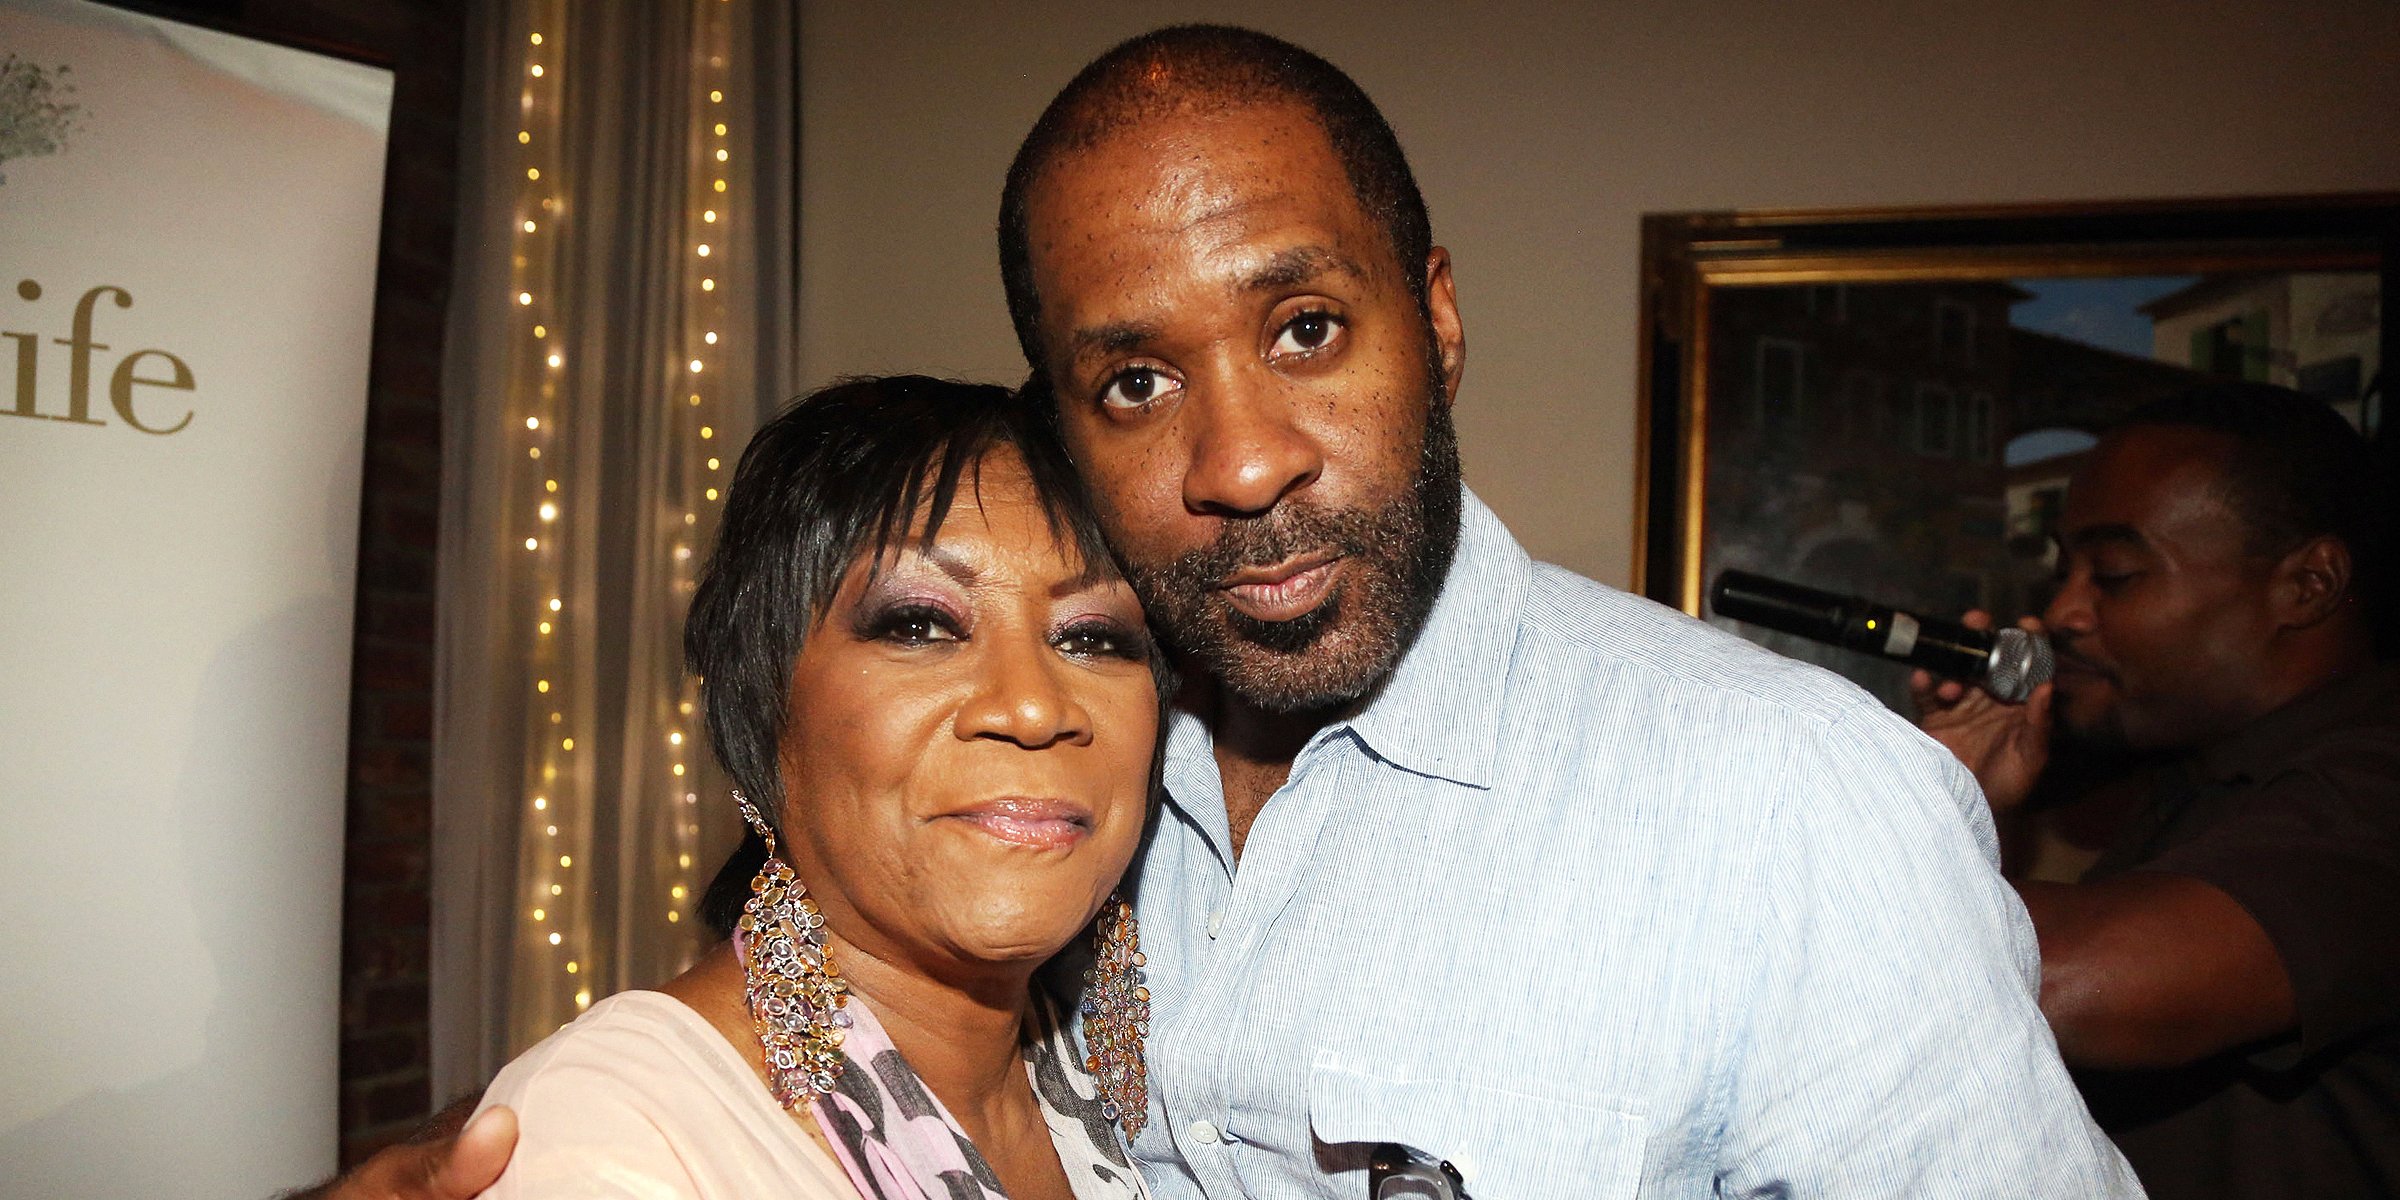 Patti LaBelle and Zuri Kye Edwards | Source: Getty Images